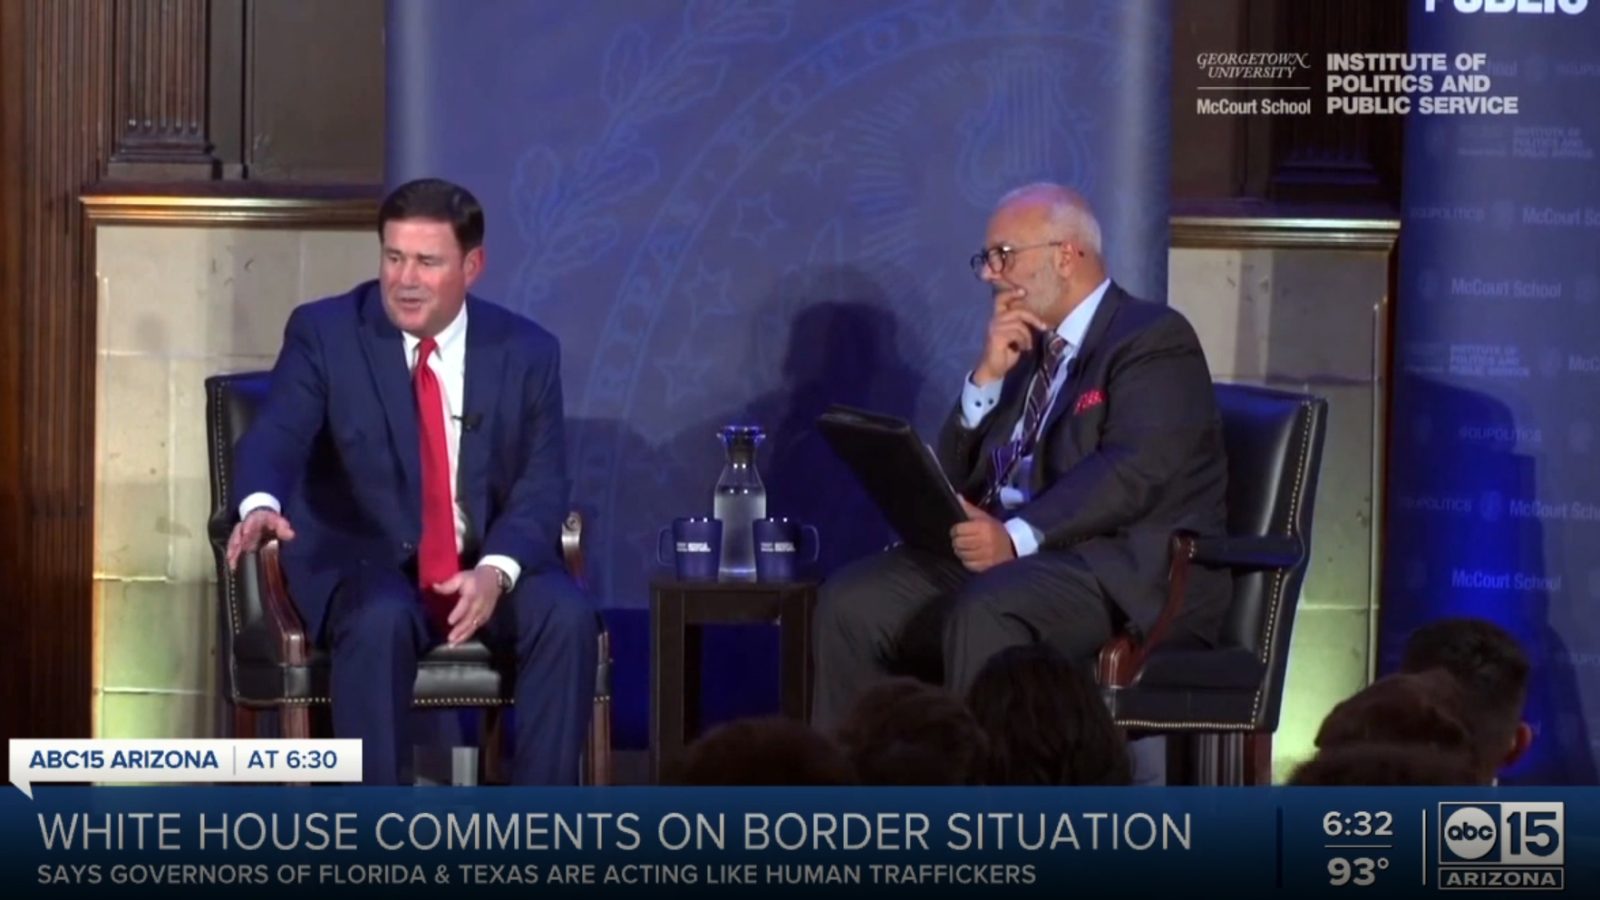 Image of Gov. Ducey &amp; Mo Elleithee on stage during Forum event